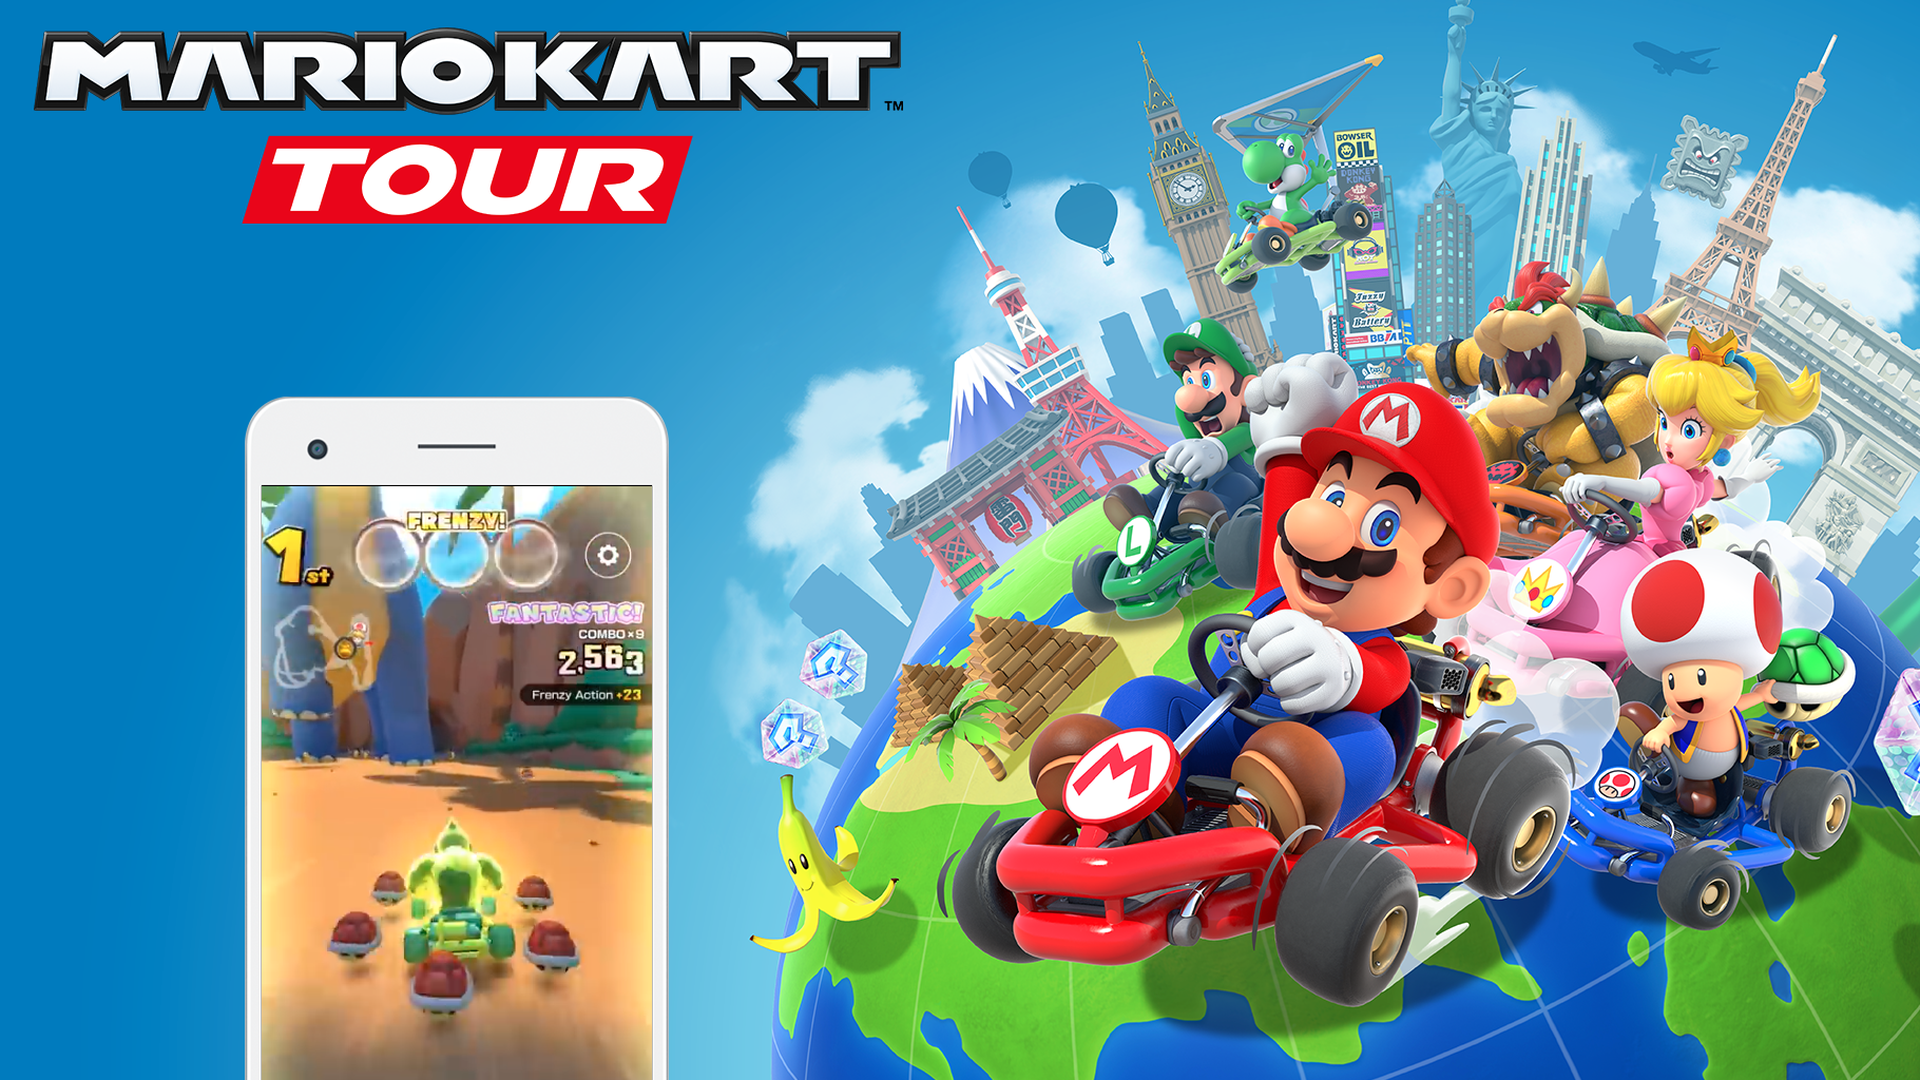 A poster with an iphone playing the Mario Kart game and Mario on the side of the phone.